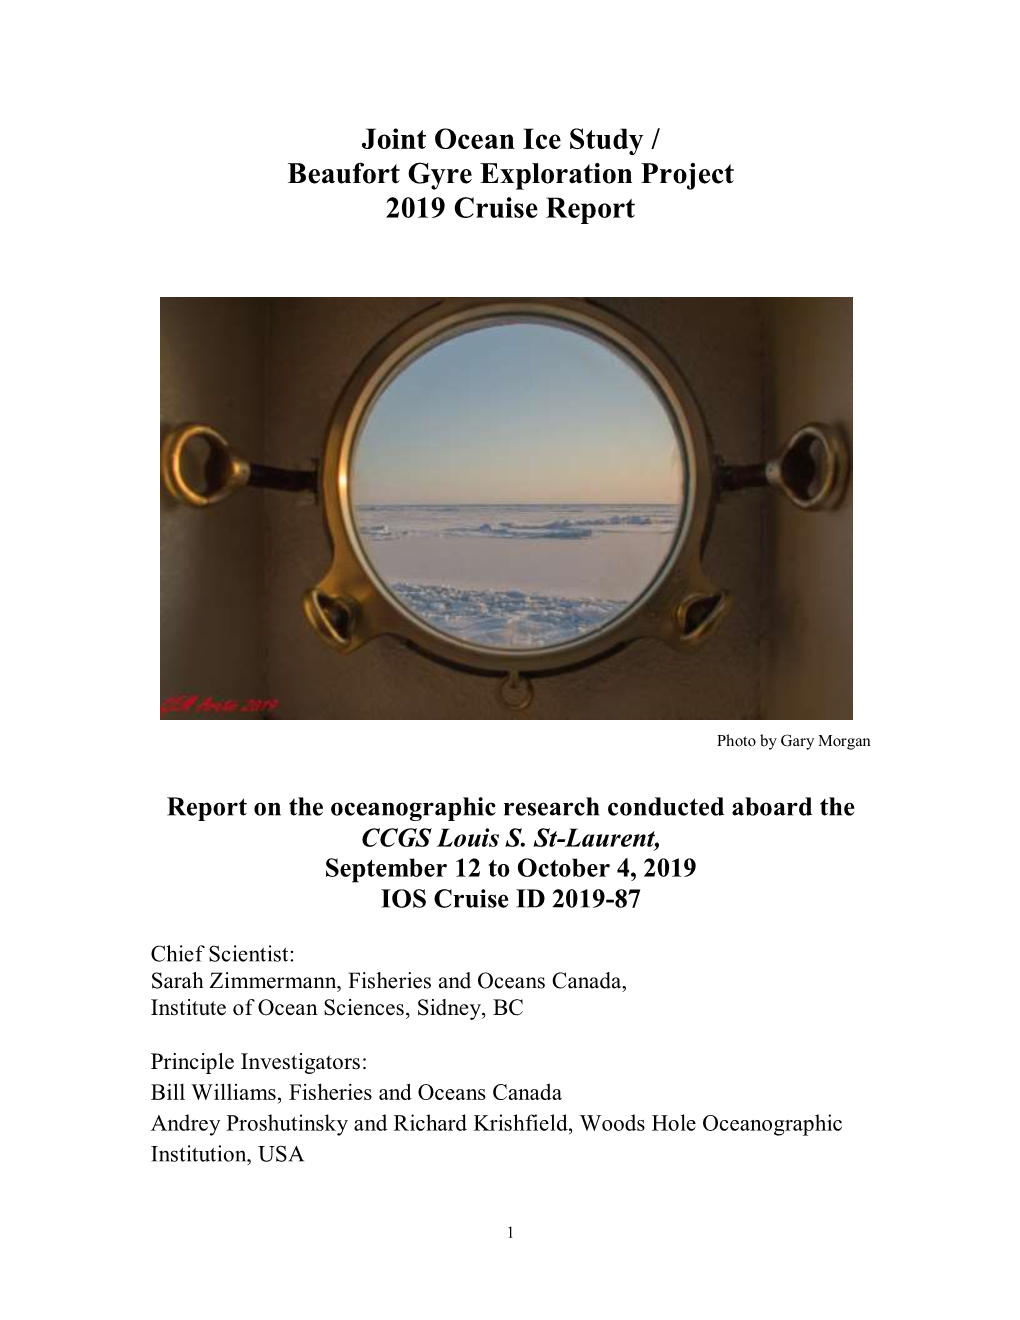 Joint Ocean Ice Study / Beaufort Gyre Exploration Project 2019 Cruise Report